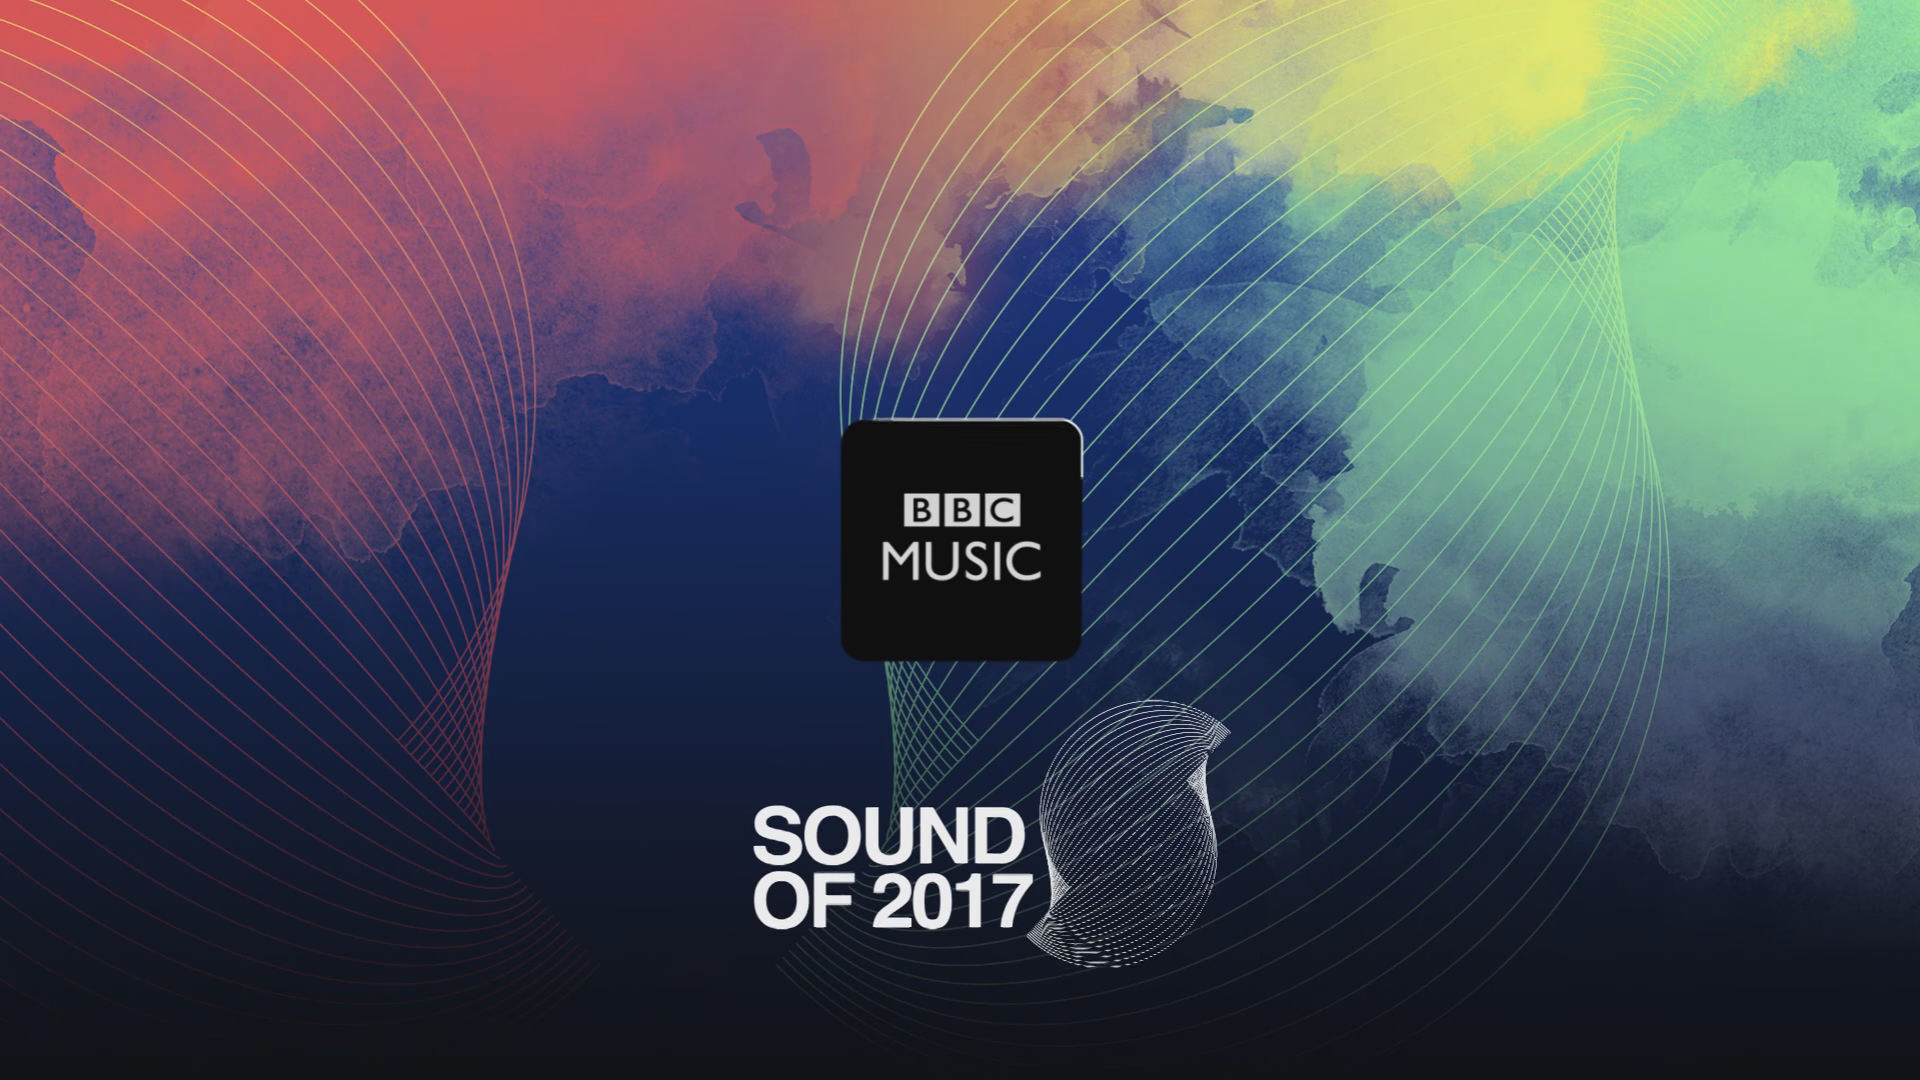 BBC Music reveal the Sound of 2017 longlist with Anderson Paak, Jorja Smith and others